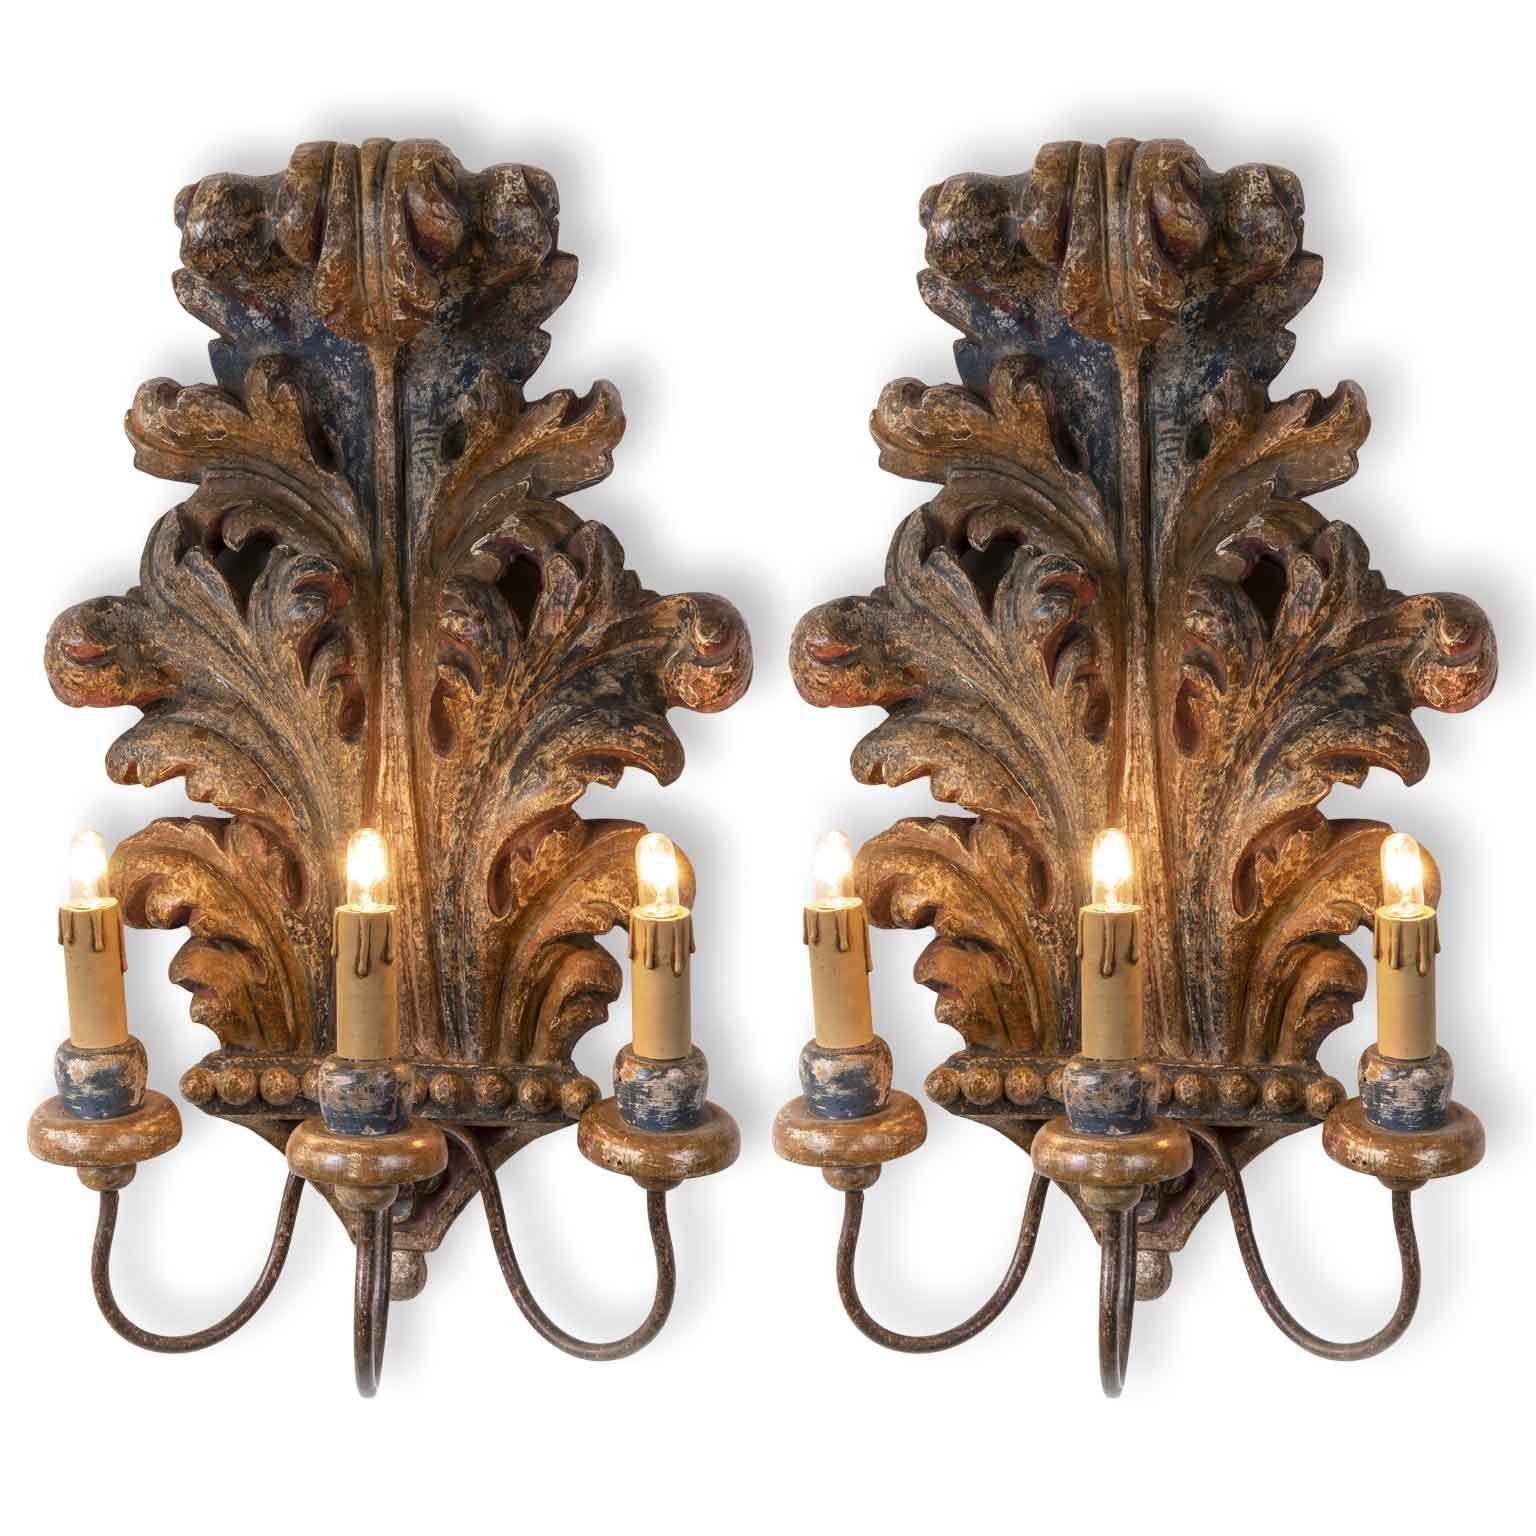 Hand-Painted Pair of Italian Sconces 1930s Blue Acanthus Leaf Carved Pine Three-Armed Lights 